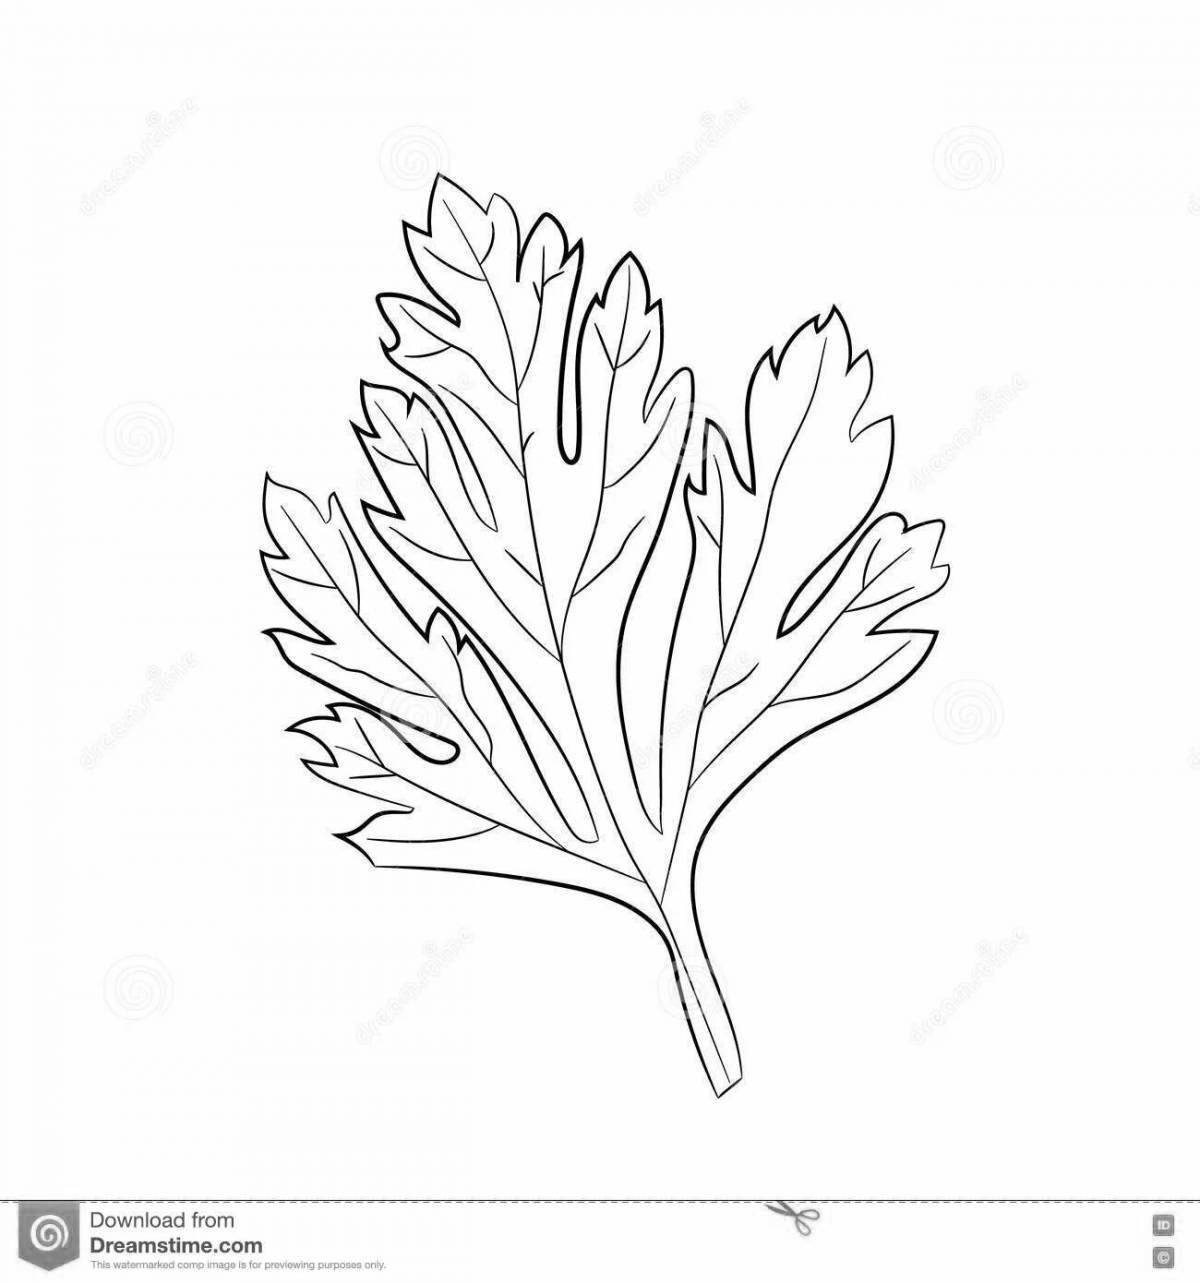 Awesome cilantro coloring page